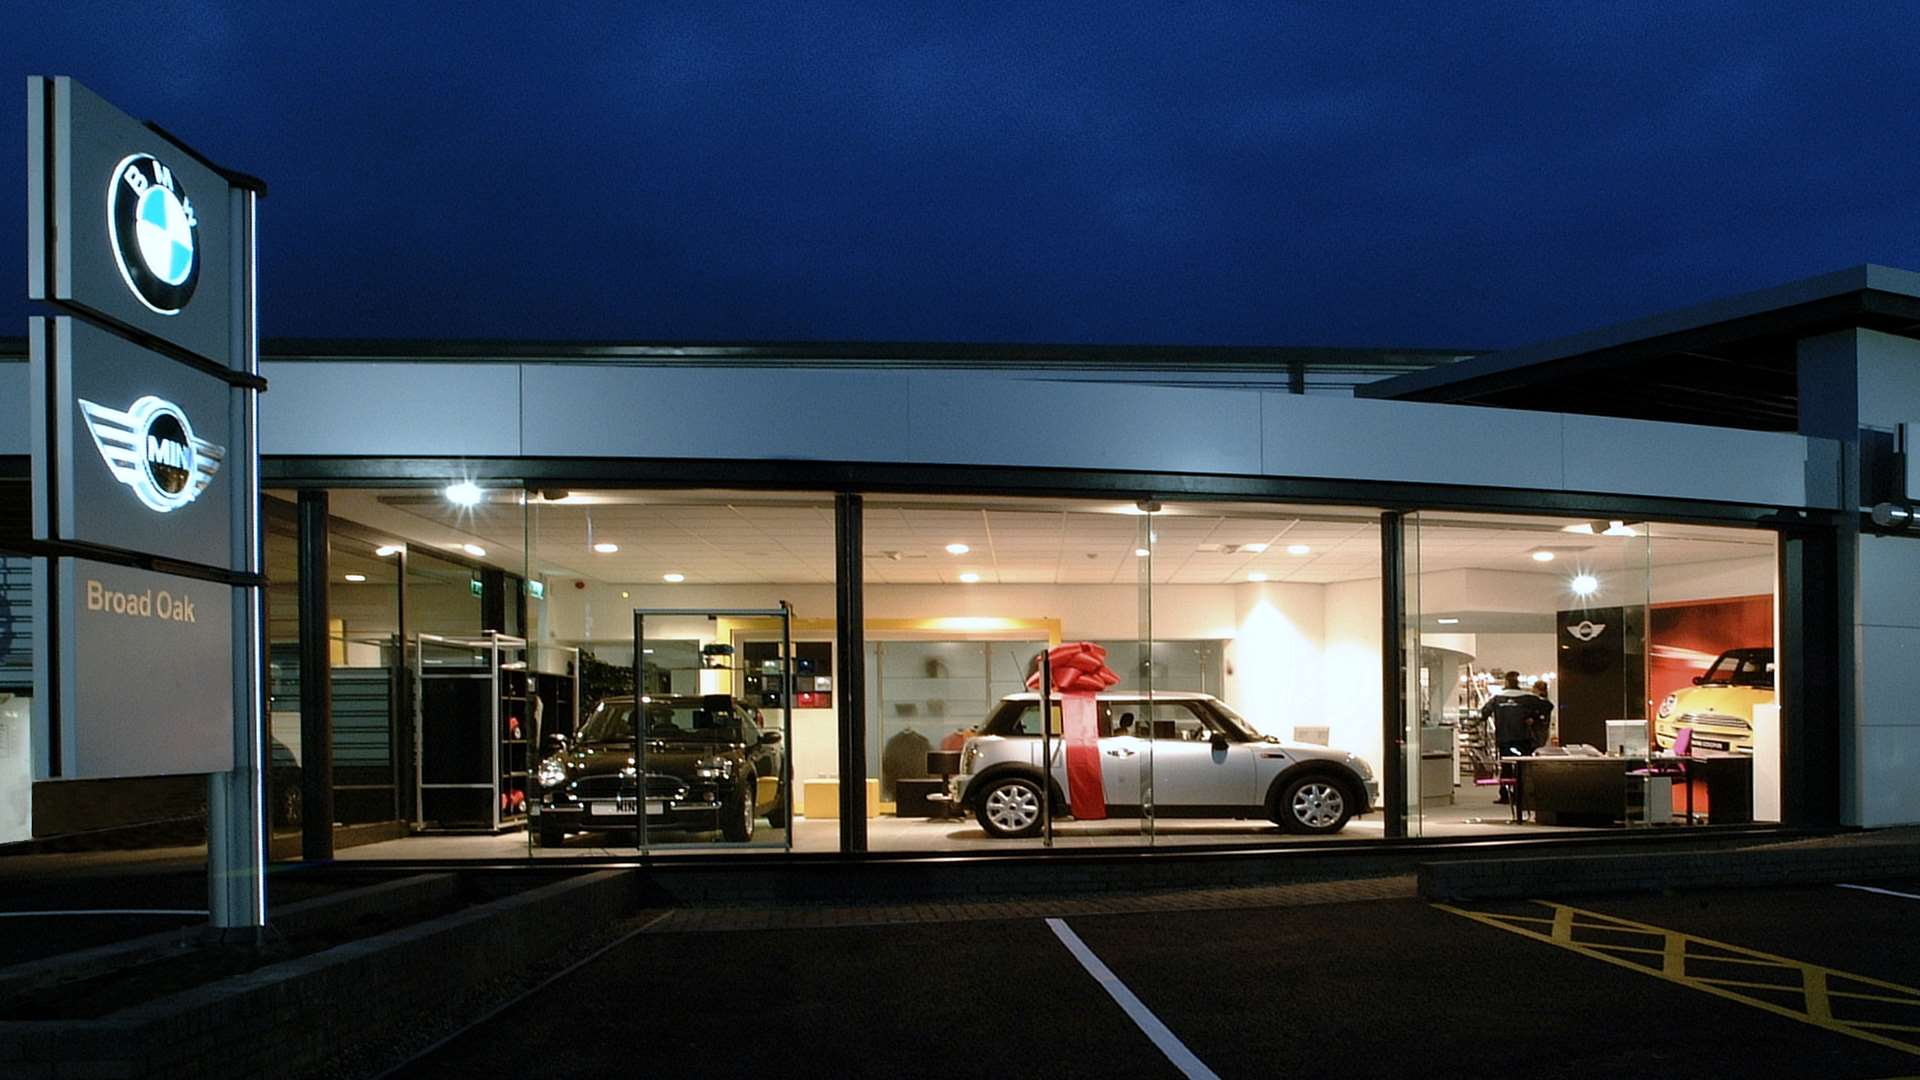 Cardy Construction built the BMW dealership in Broad Oak for Barretts of Canterbury